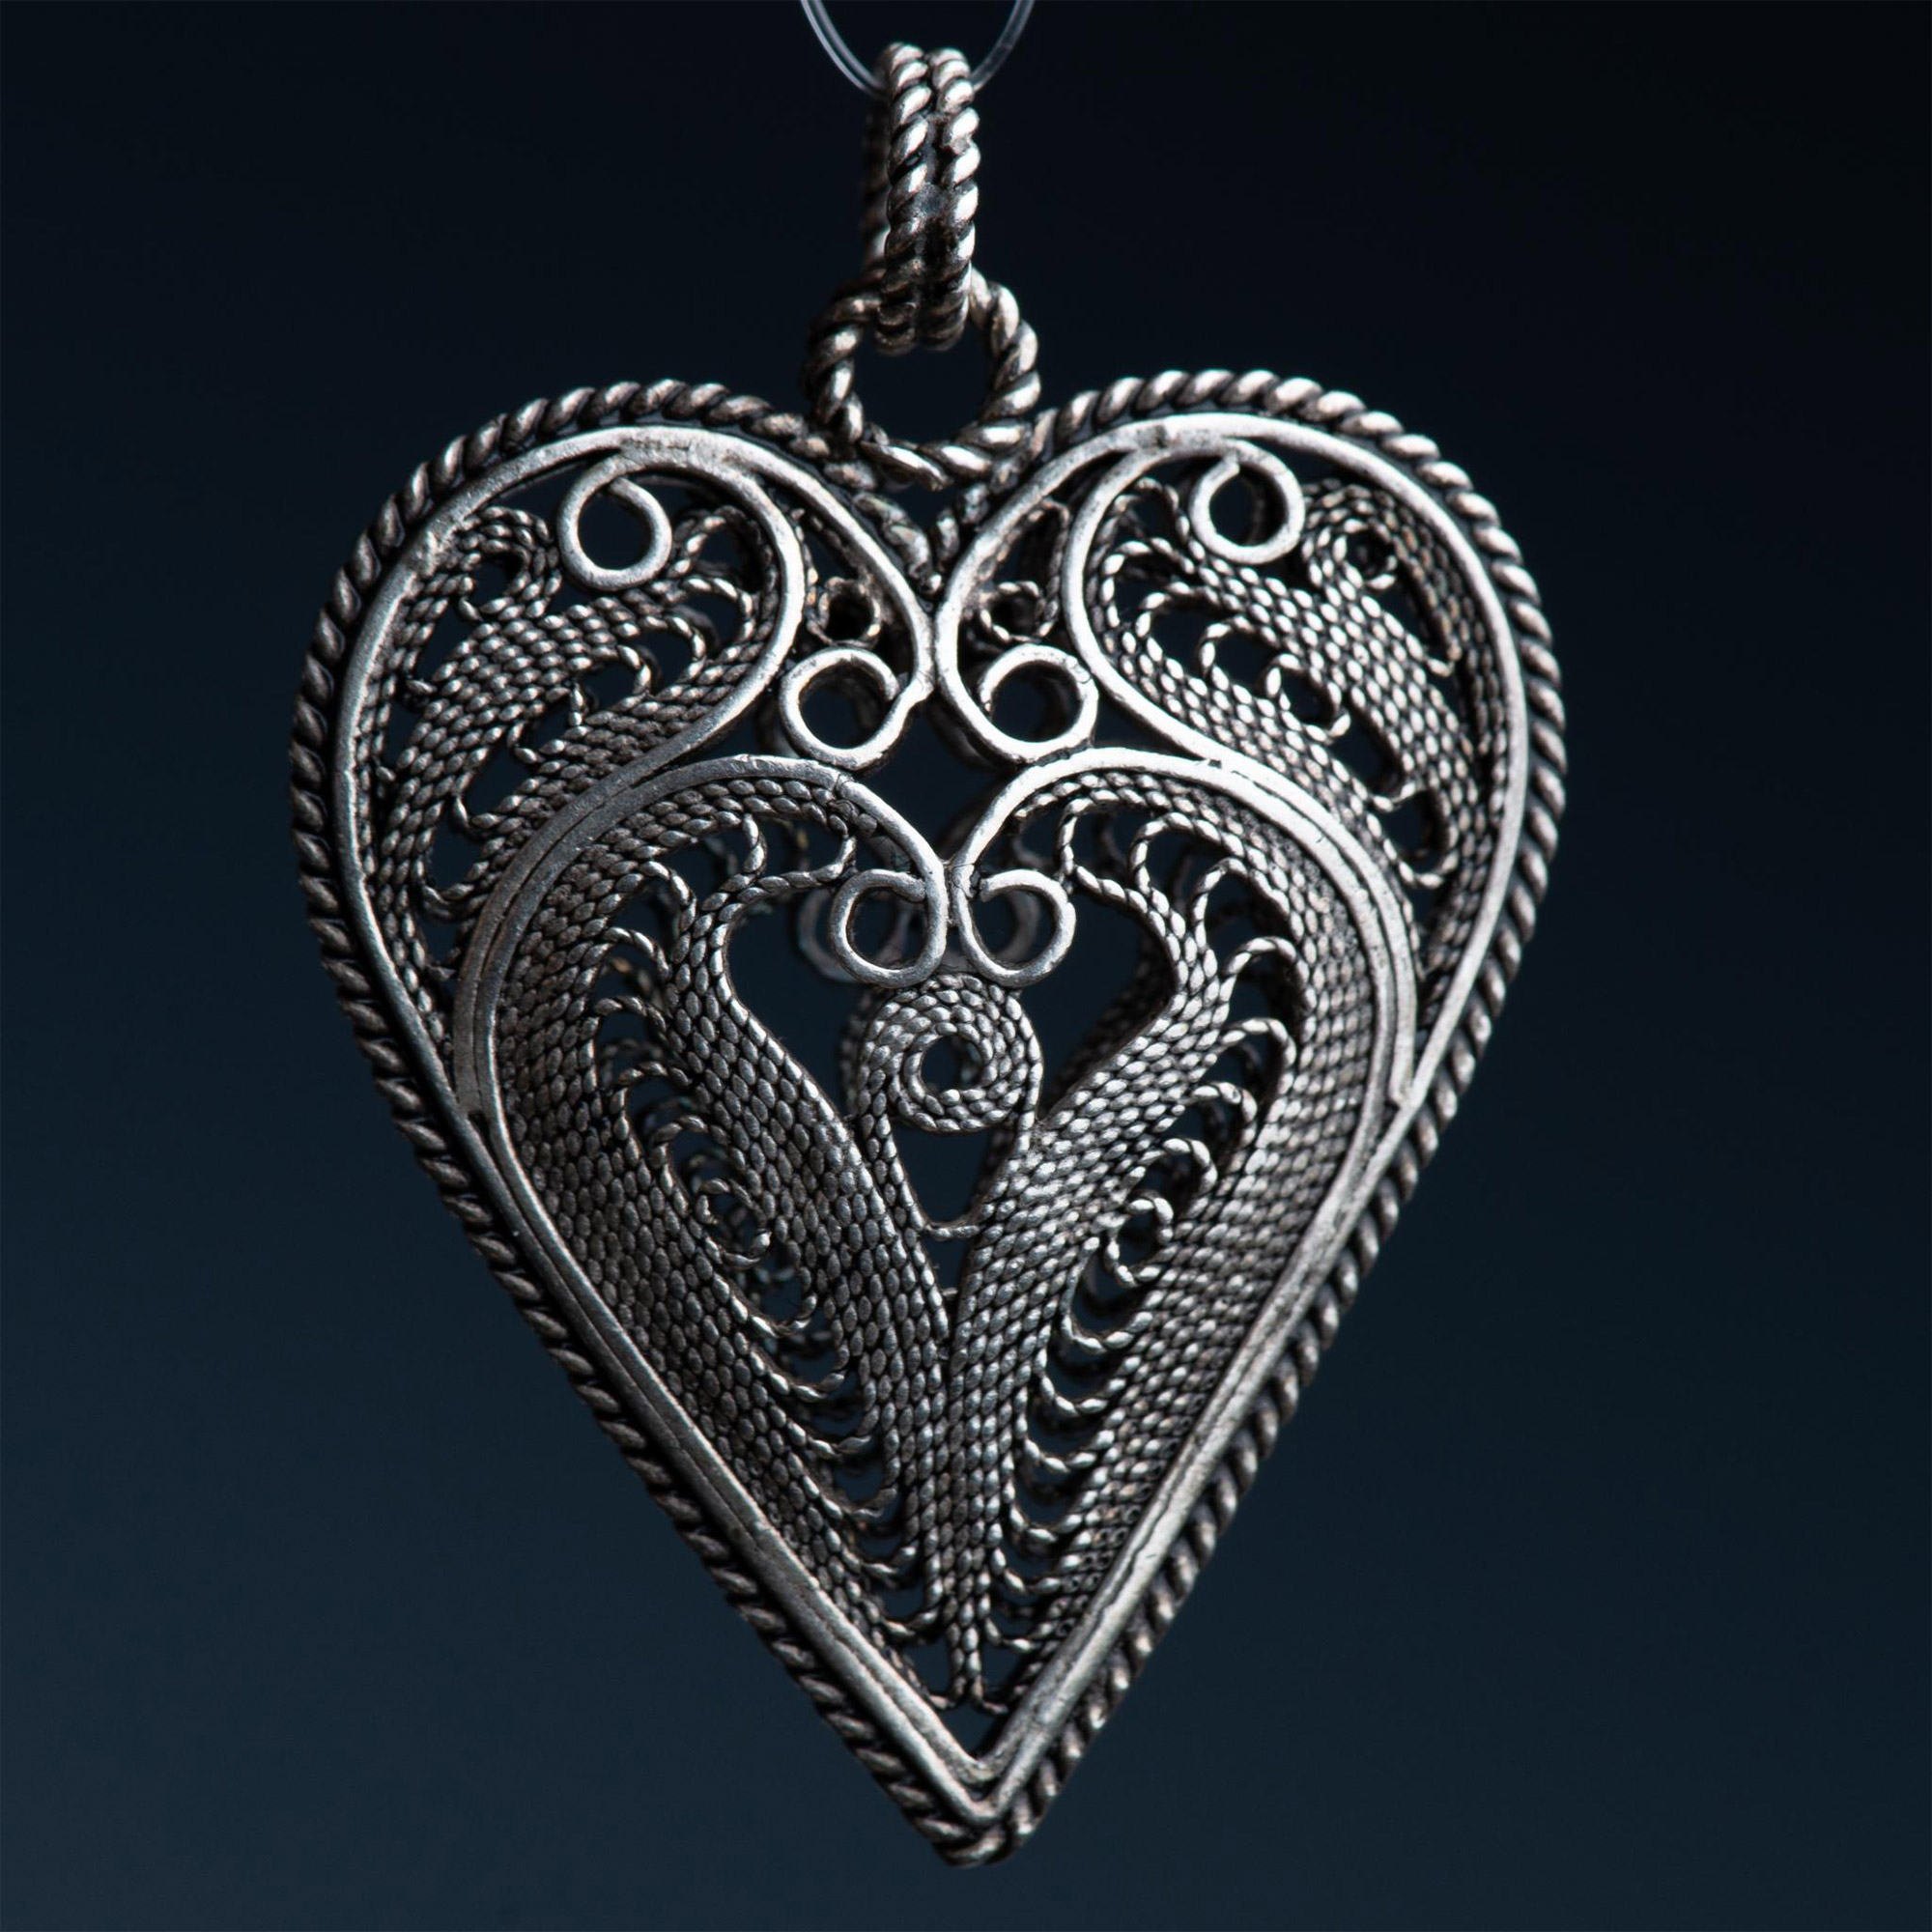 Delicate Turkish Sterling Silver Filigree Heart Pendant - Image 2 of 2